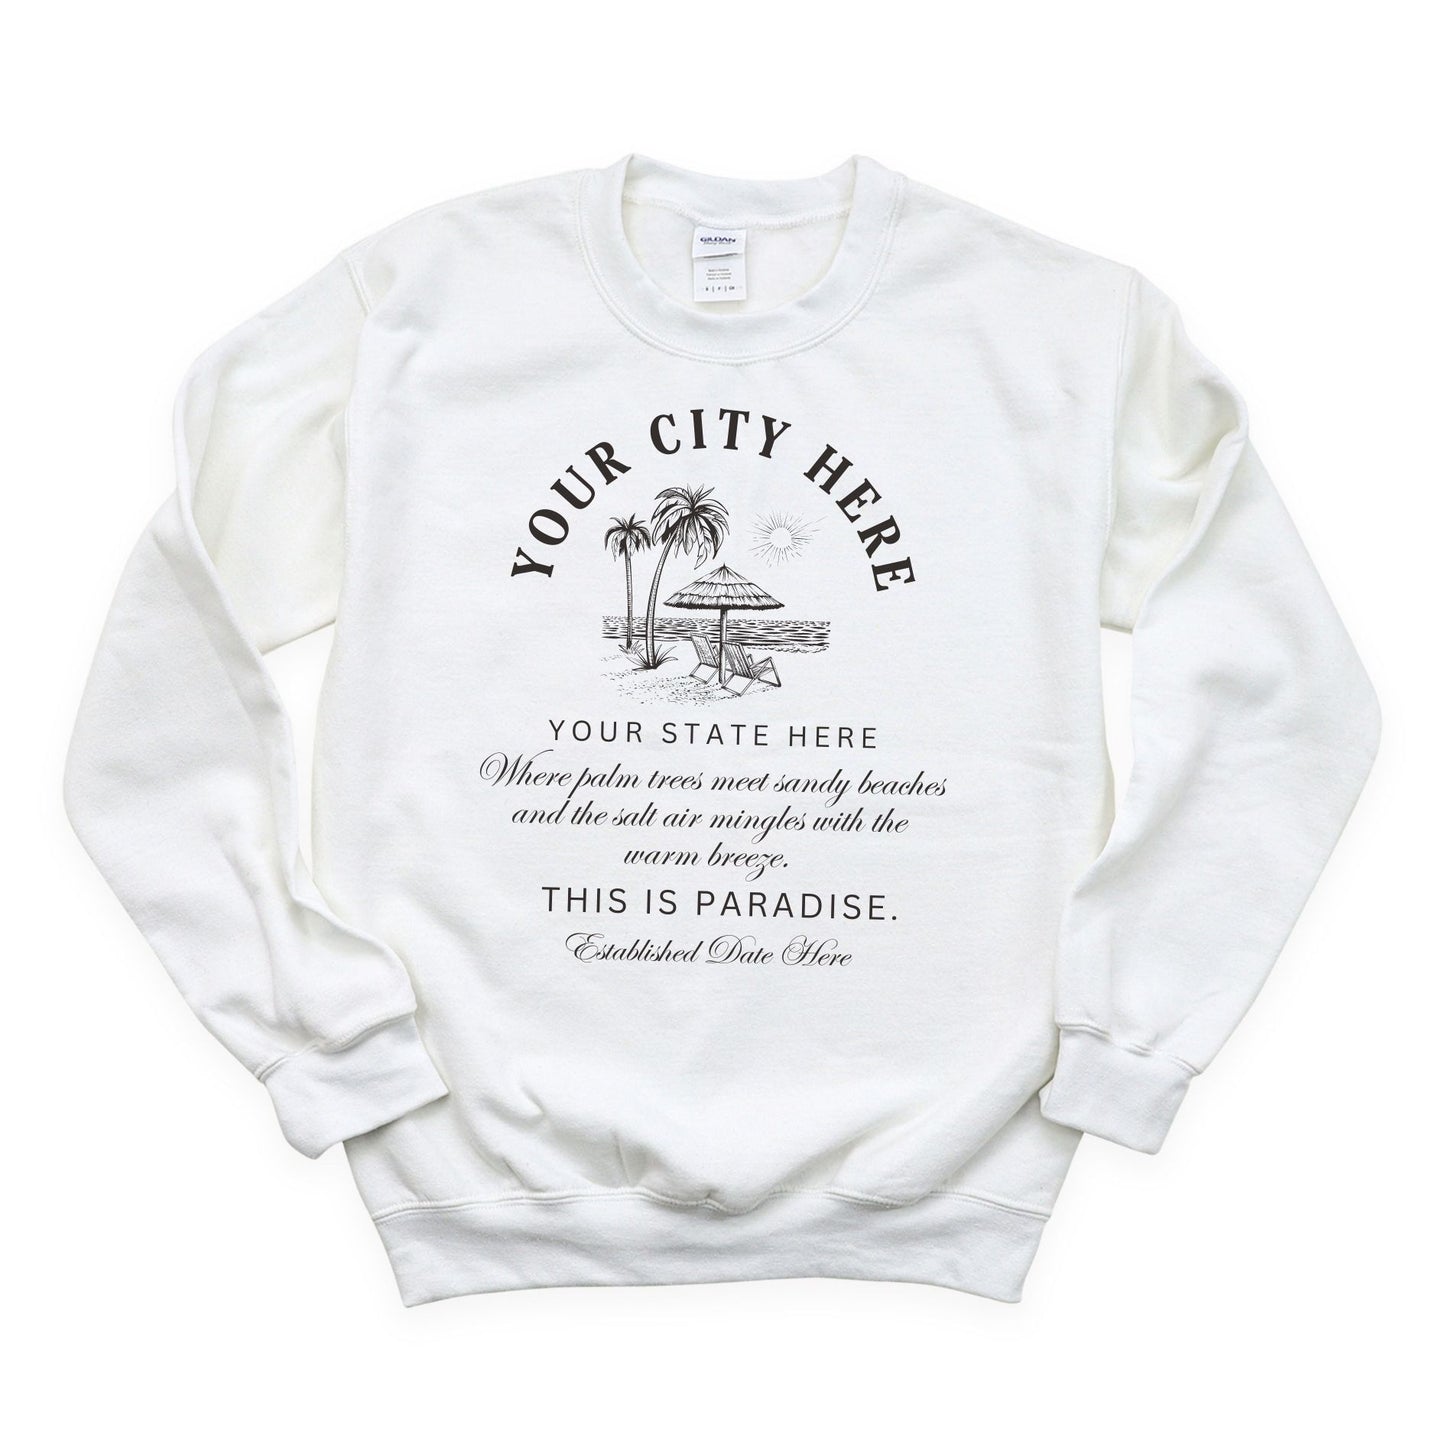 This is Paradise Sweatshirt - Customize With Your City